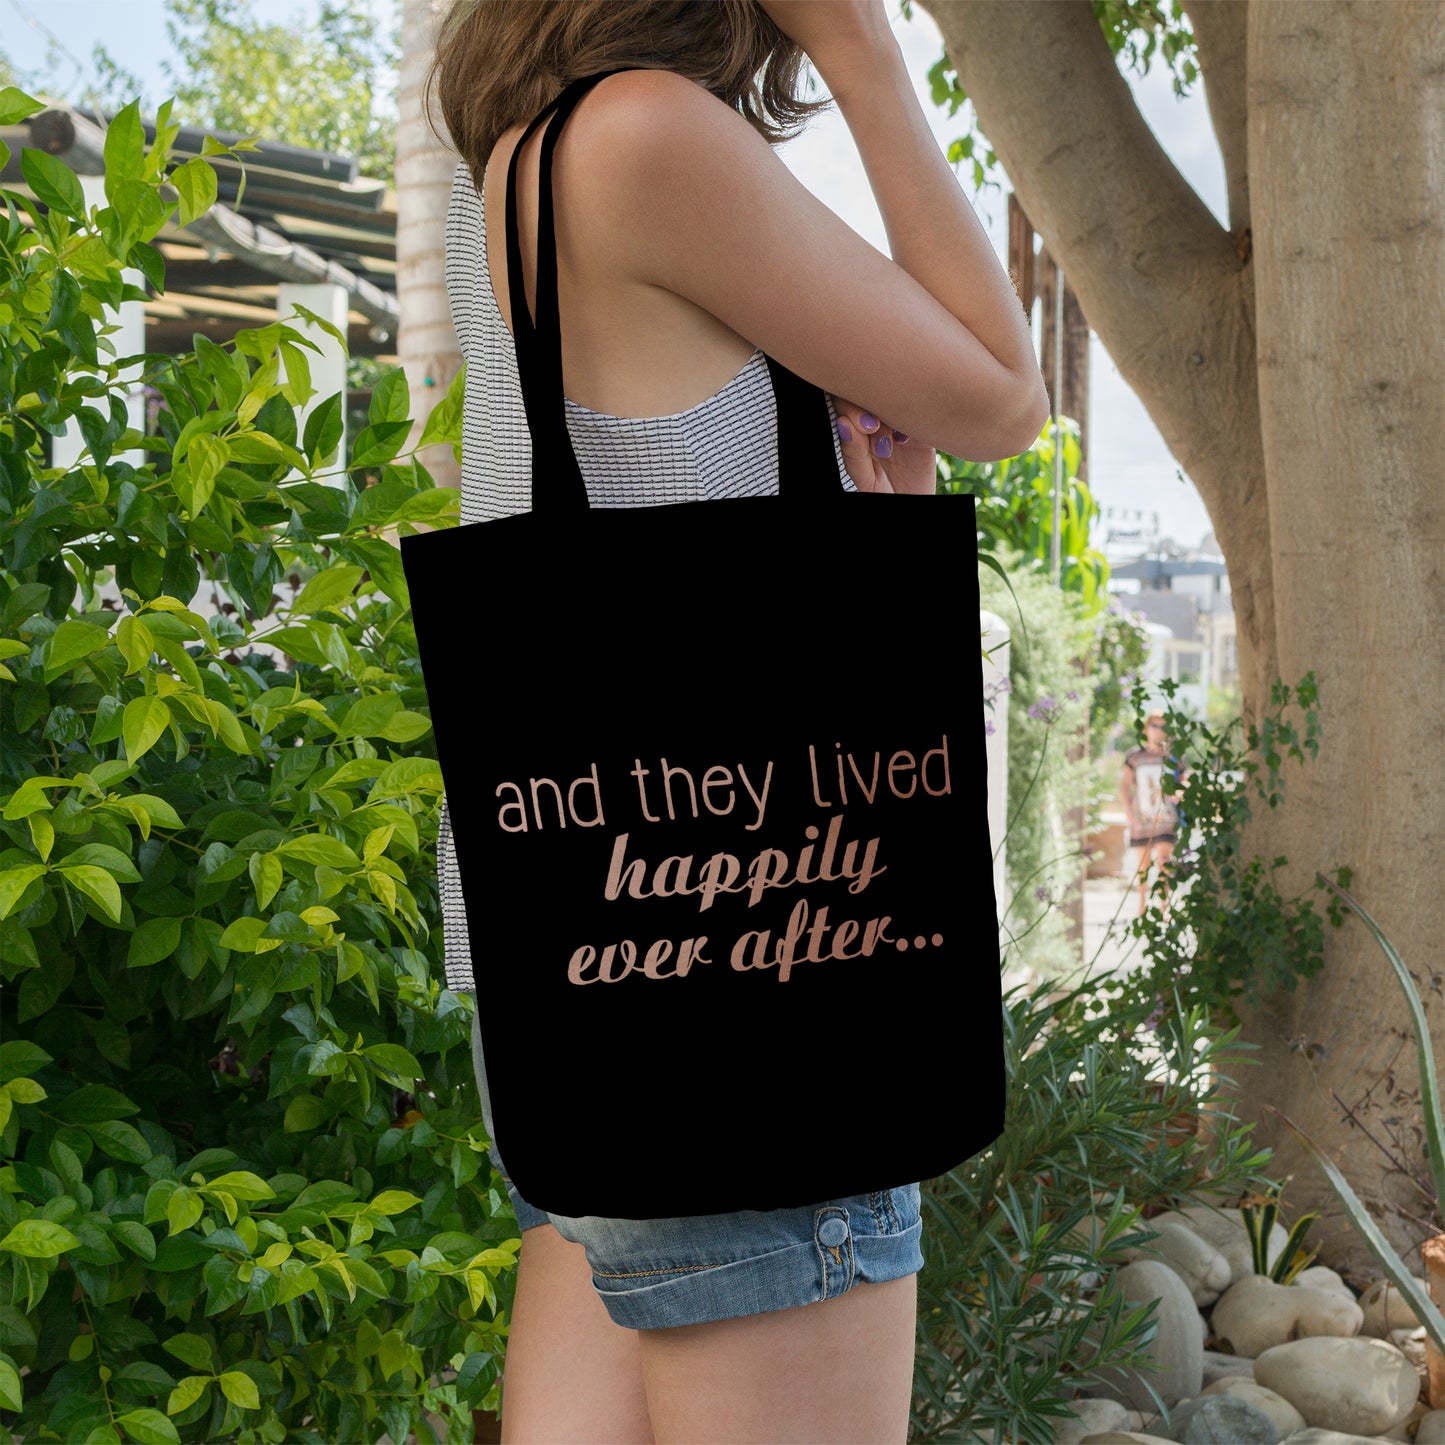 And they lived happily ever after... | 100% Organic Cotton tote bag